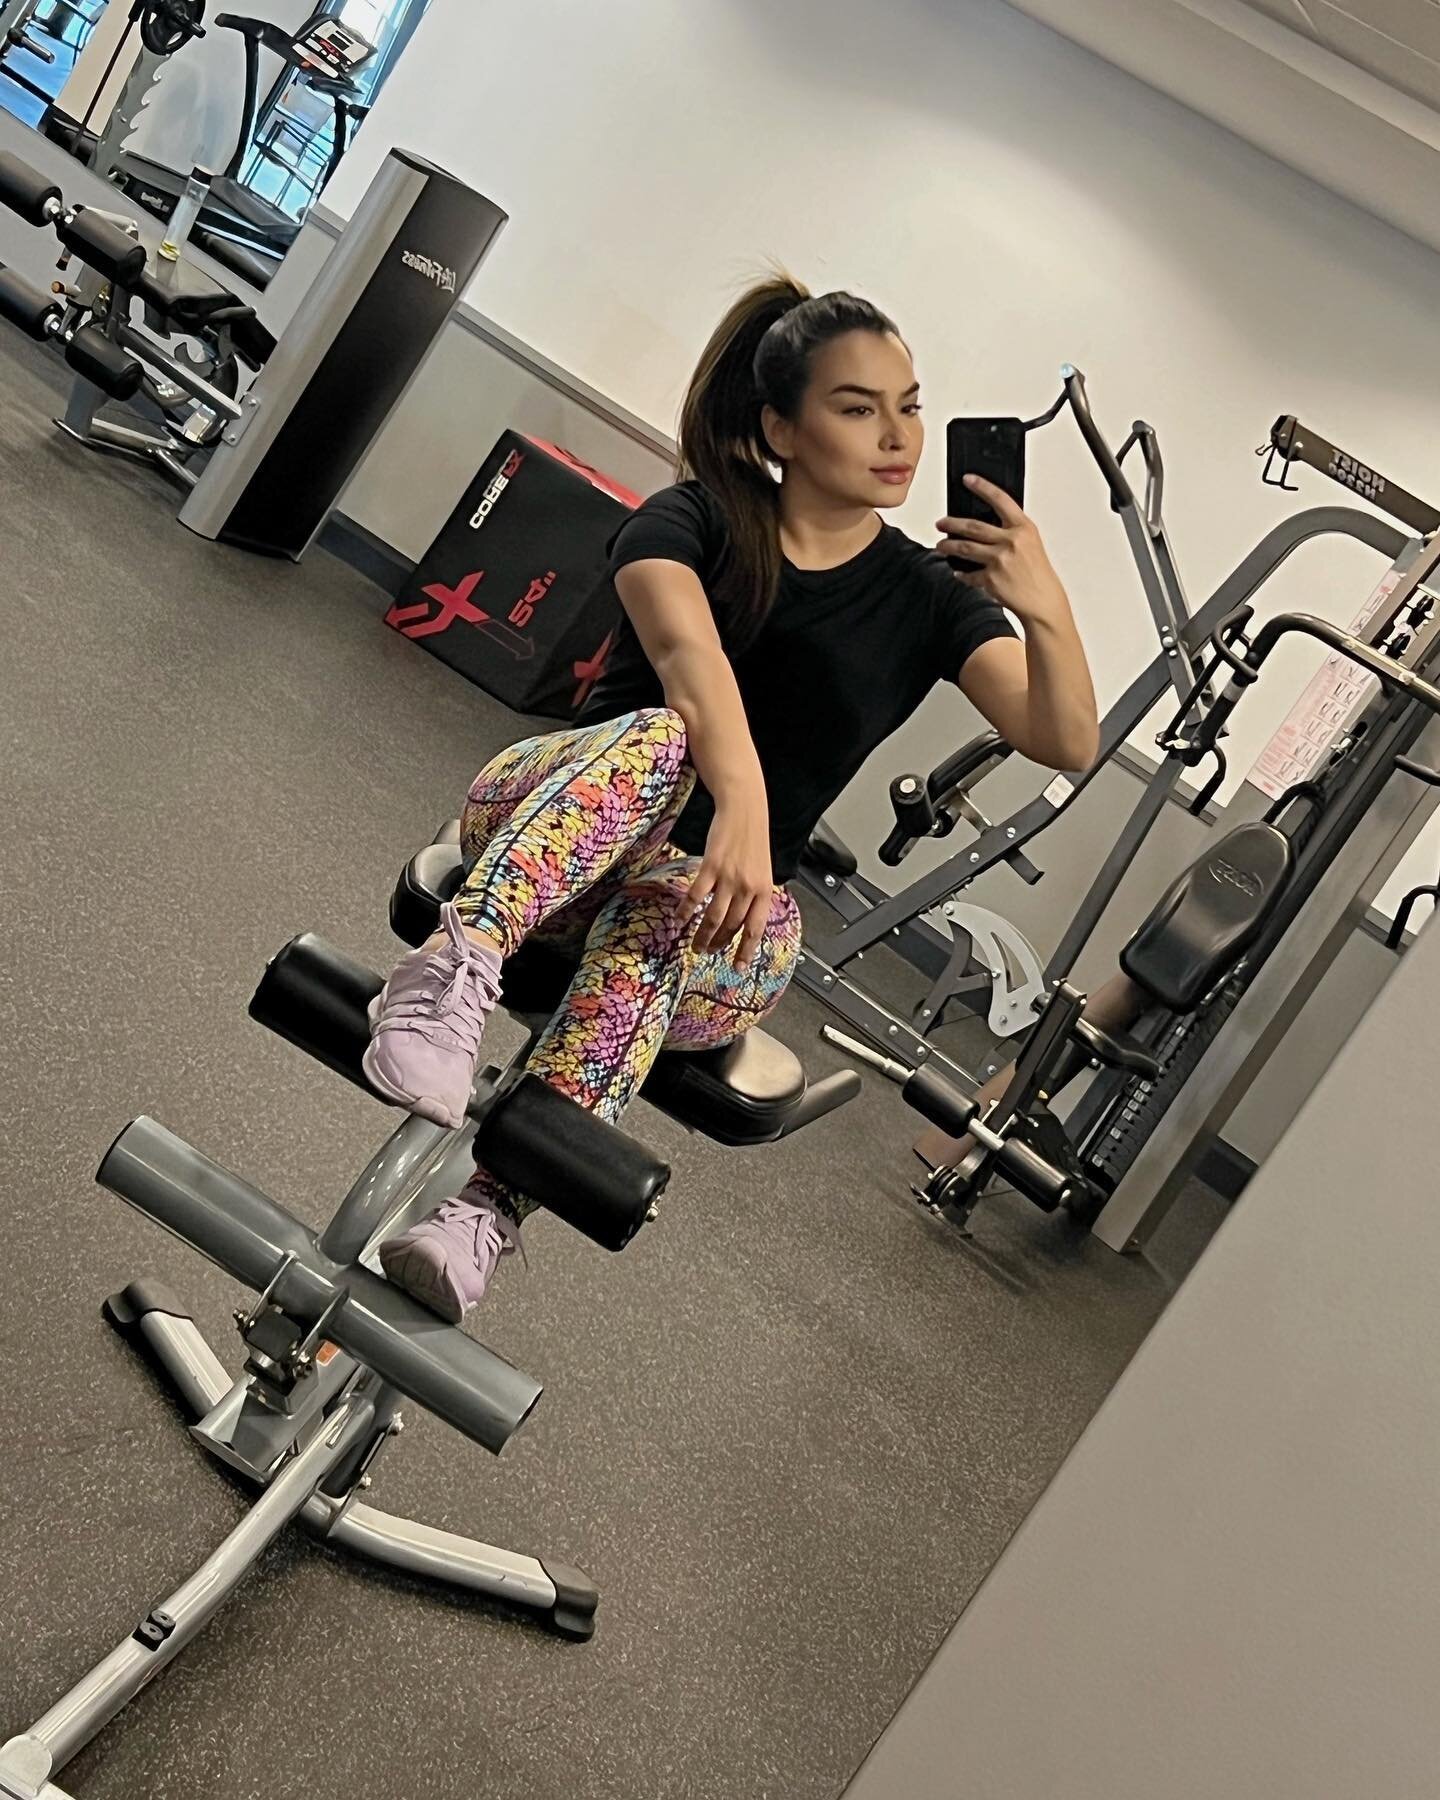 After a long day of working, taking care of 100 other responsibilities that come with being a mom, wife, business owner and all the other household tasks etc I&rsquo;m taking a few minutes for self care and trying to get into shape! 

Joke of the day